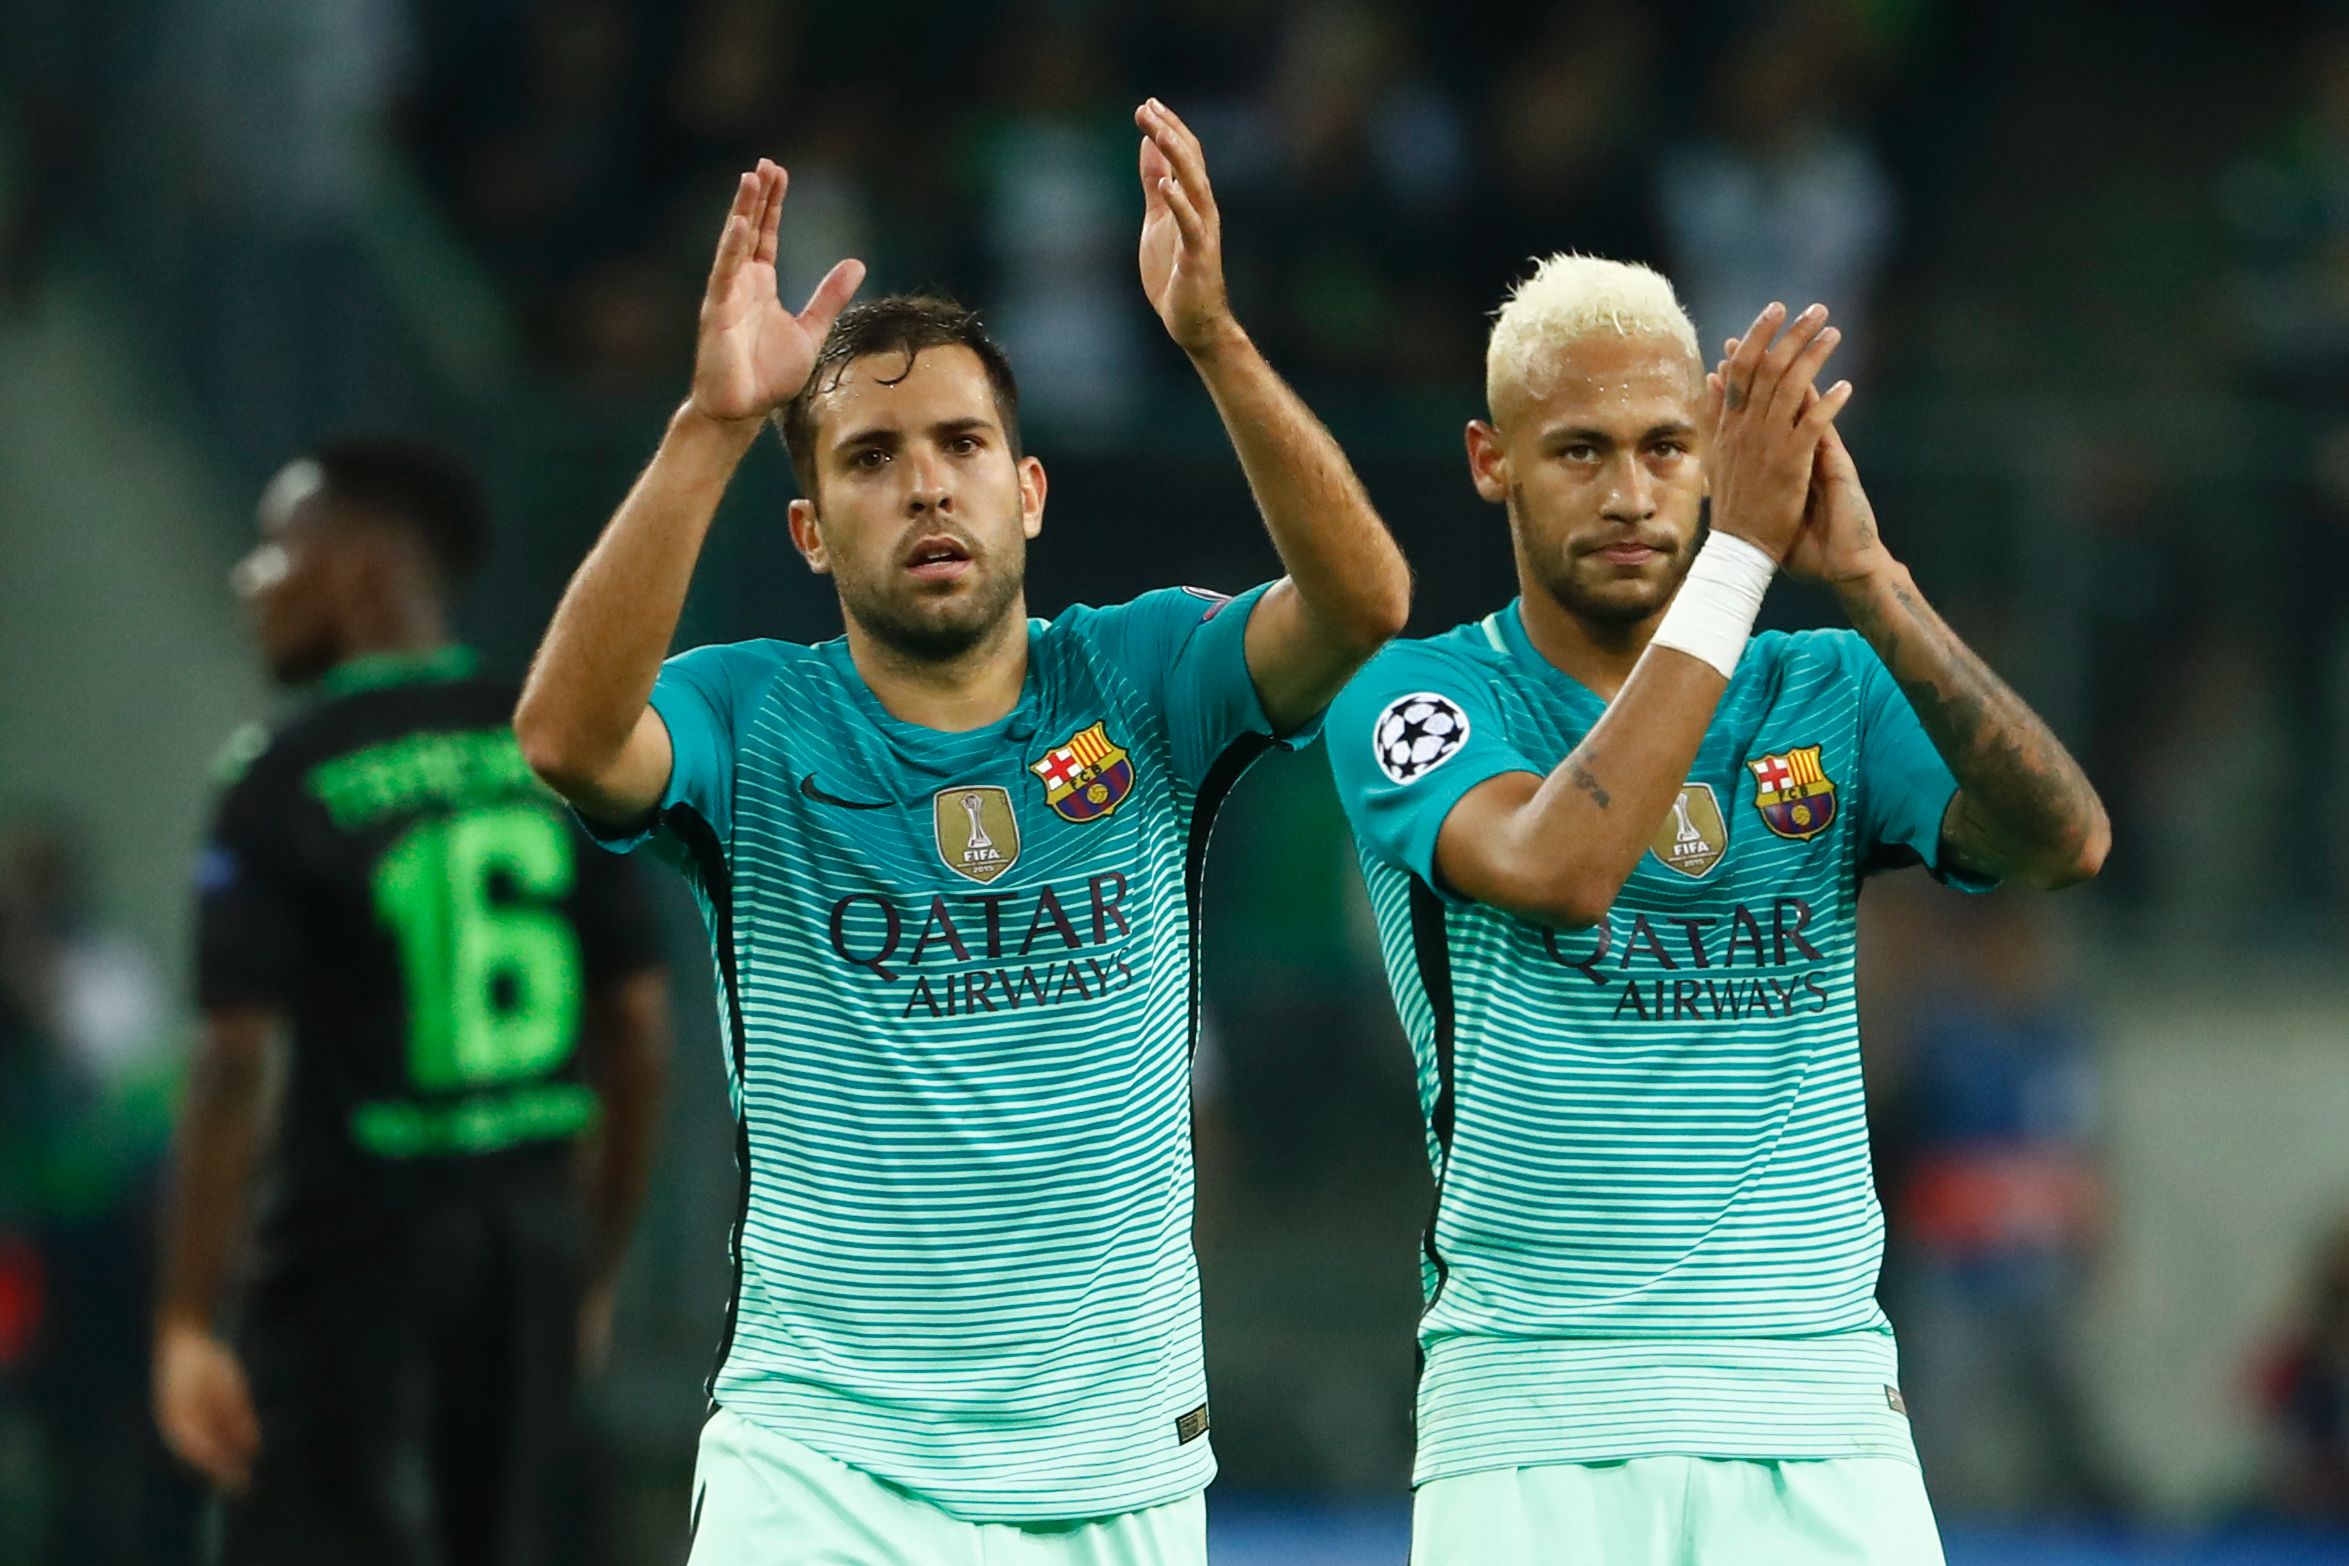 Barcelona battle from goal down to beat Gladbach 2-1